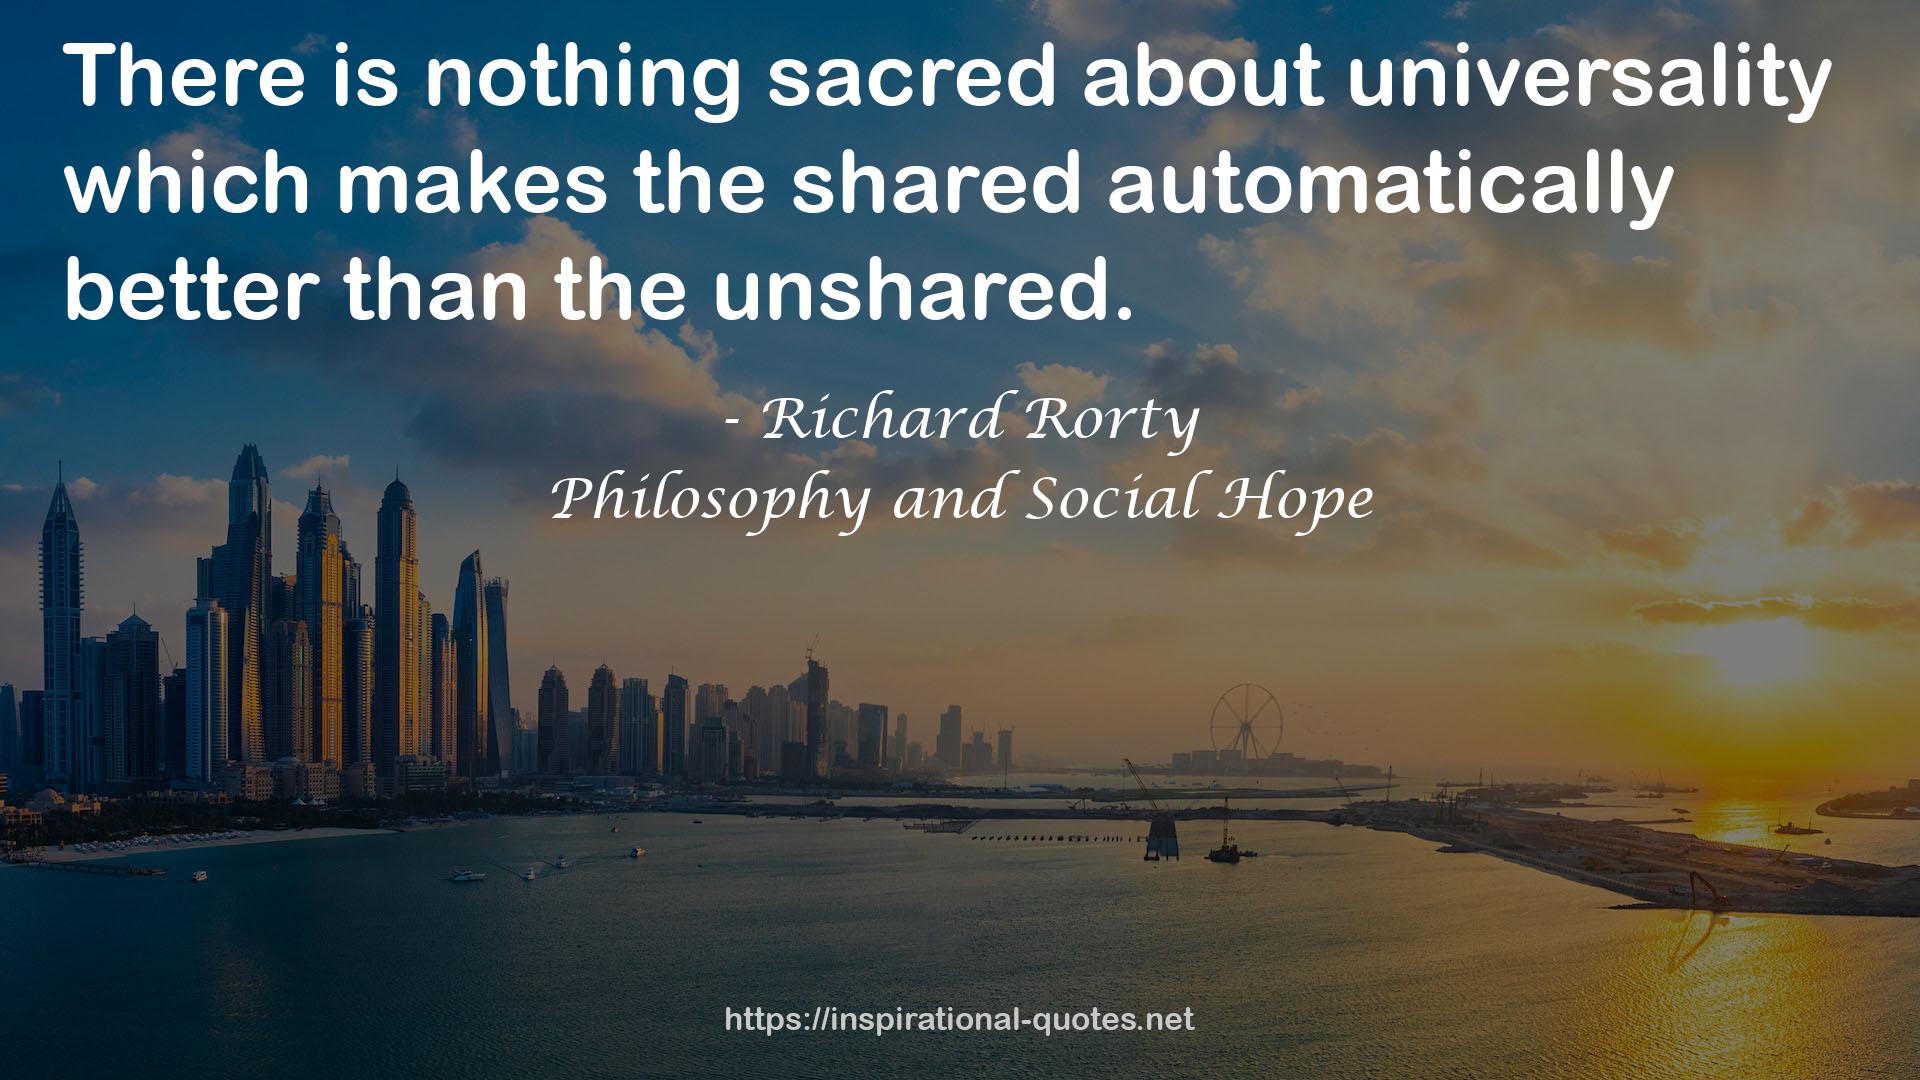 Philosophy and Social Hope QUOTES